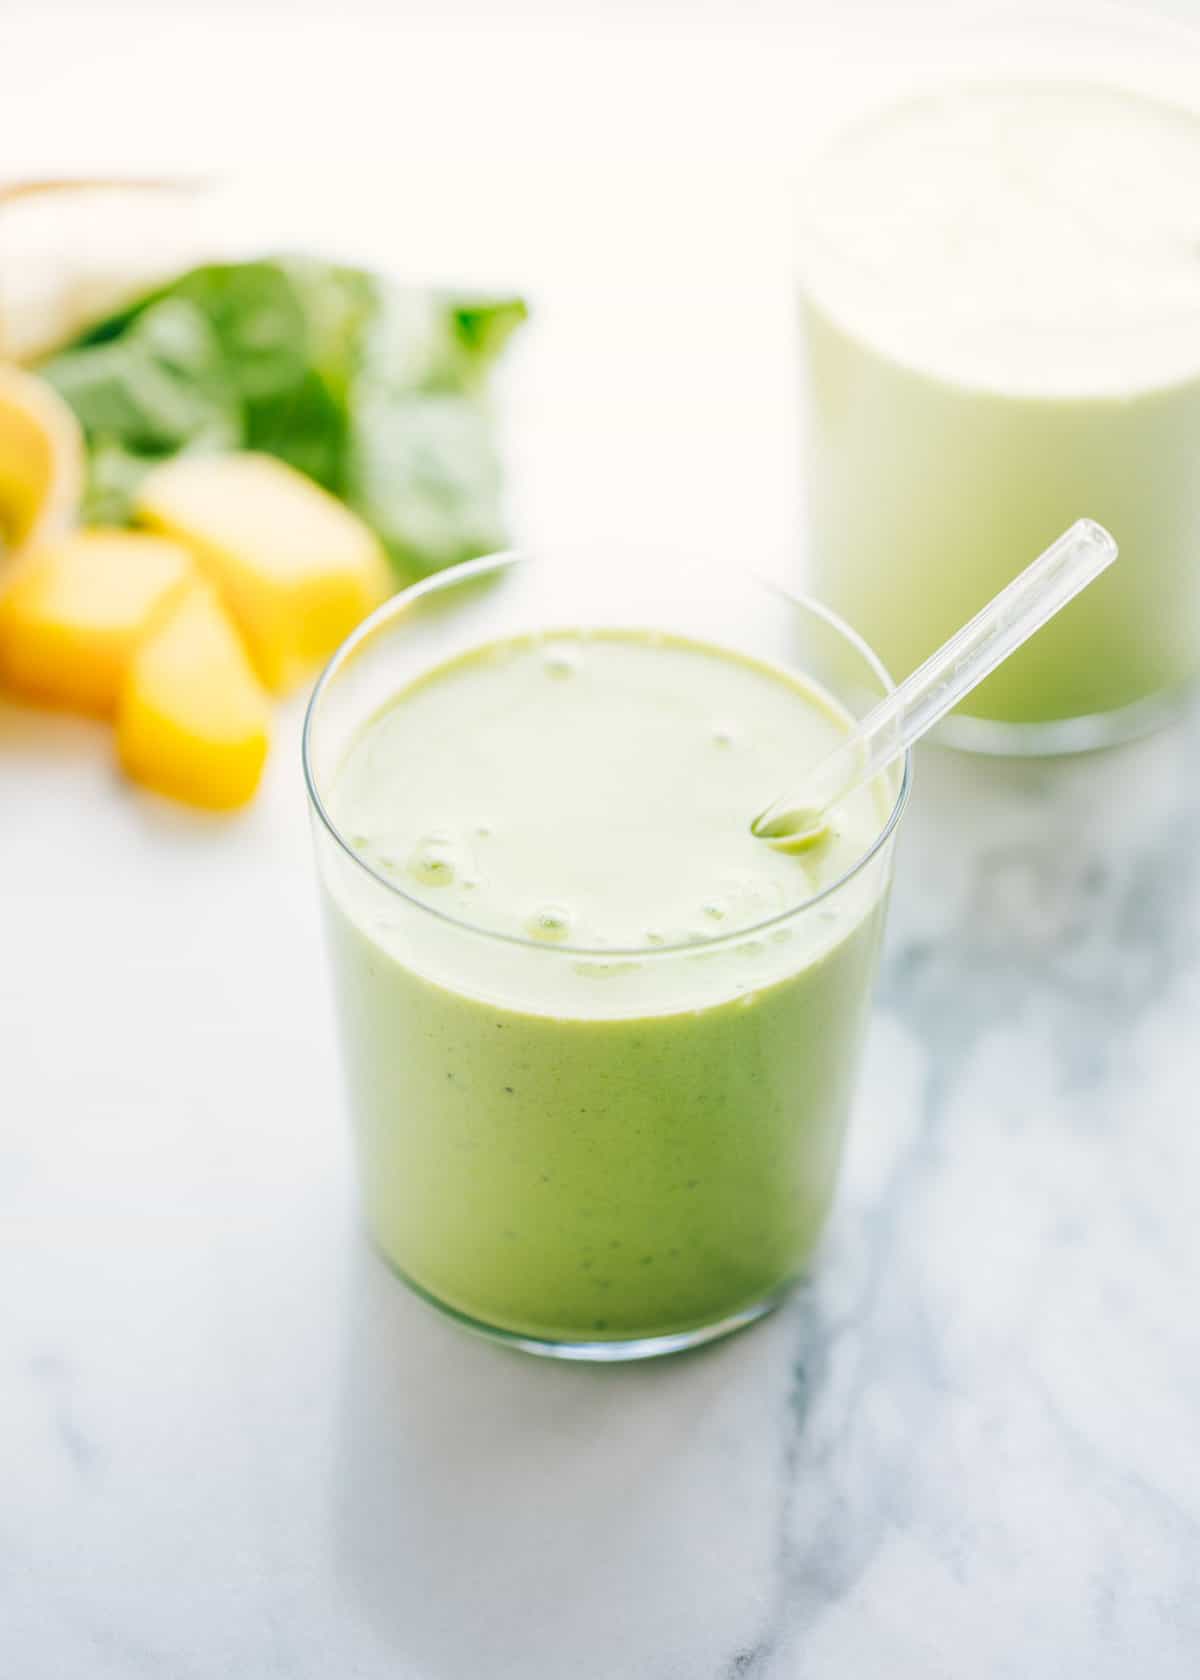 Green smoothie in a glass with straw.